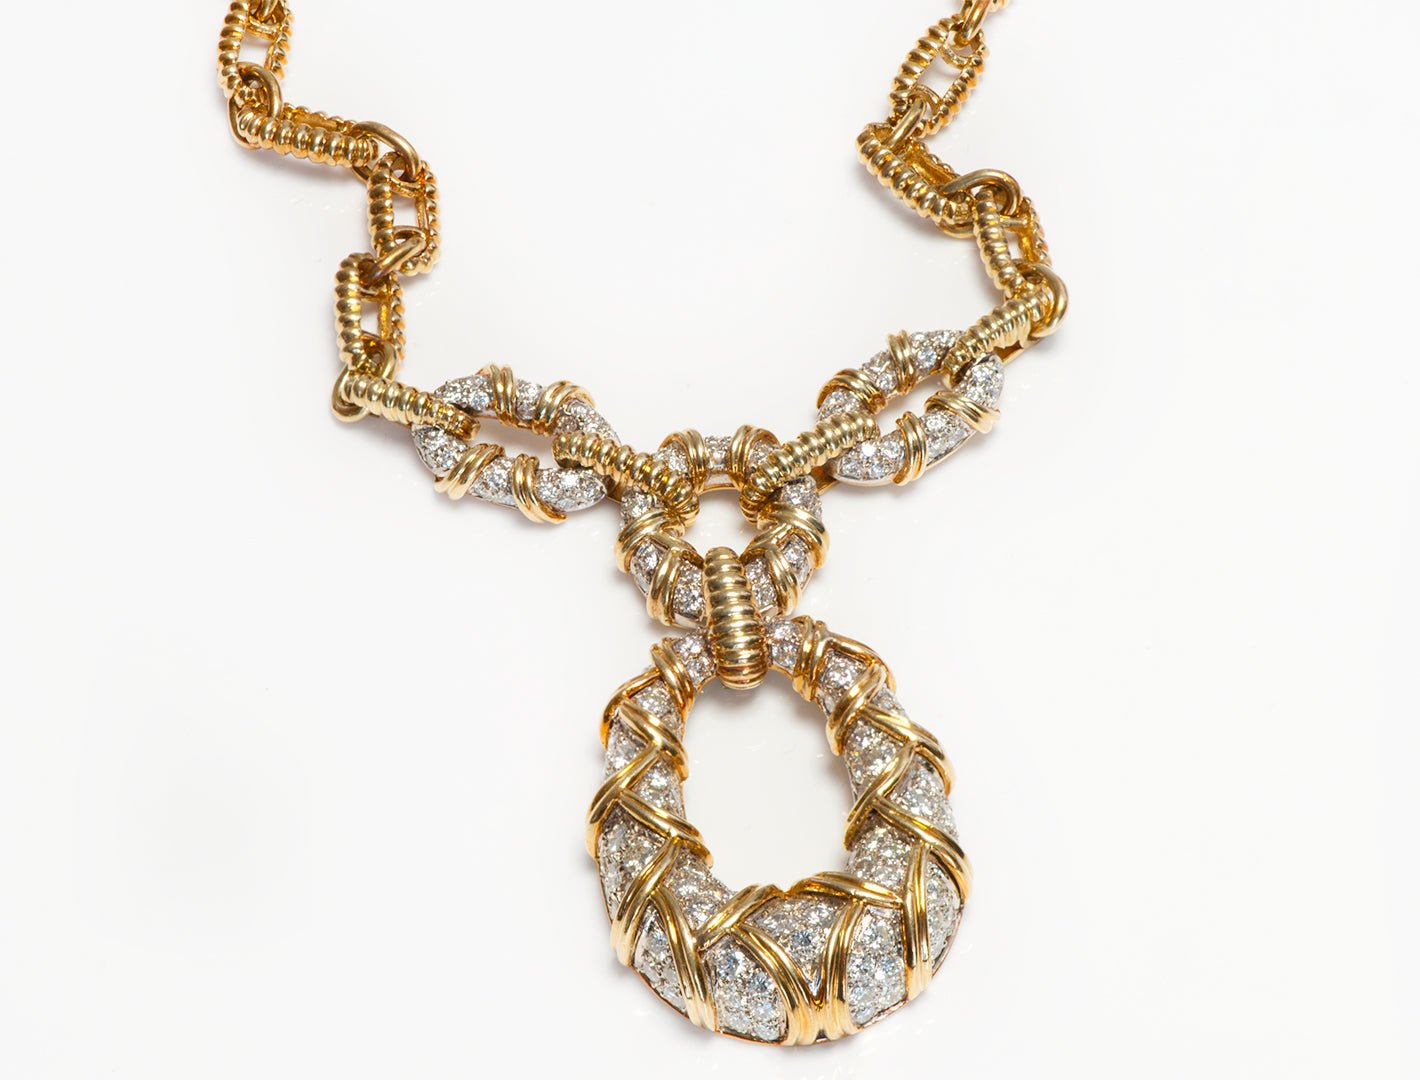 Hammerman Brothers 18K Gold Diamond Chain Link Necklace